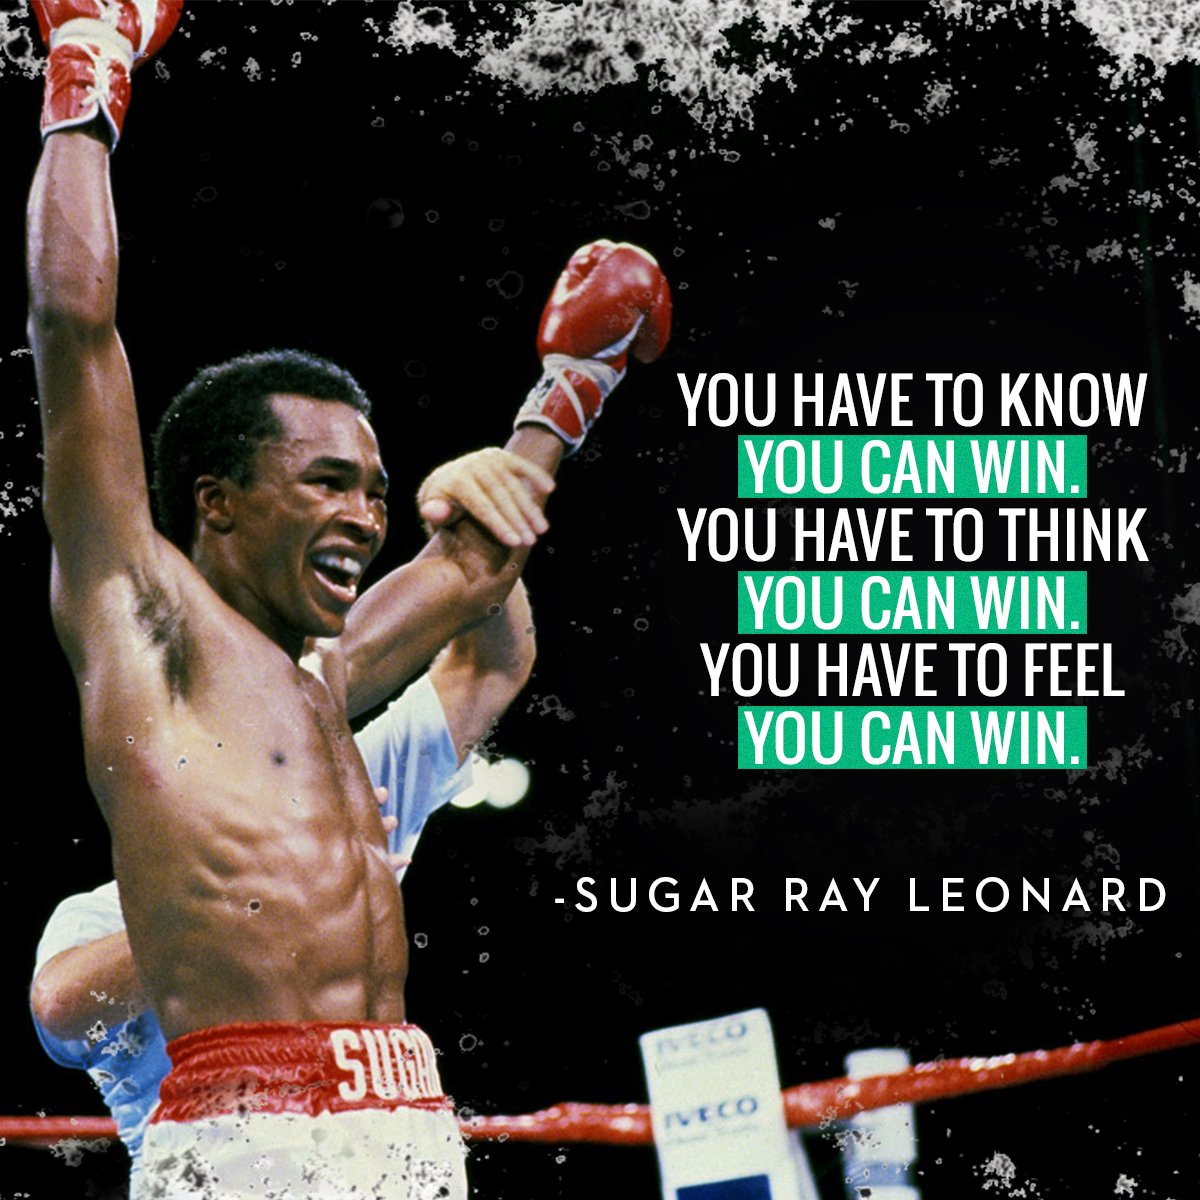 “You have to know you can win. You have to think you can win. You have to feel you can win.” — Sugar Ray Leonard

#quote #lifequotes #inspirational #quotesdaily #instaquote #inspirationalquotes #quotes #quoteoftheday